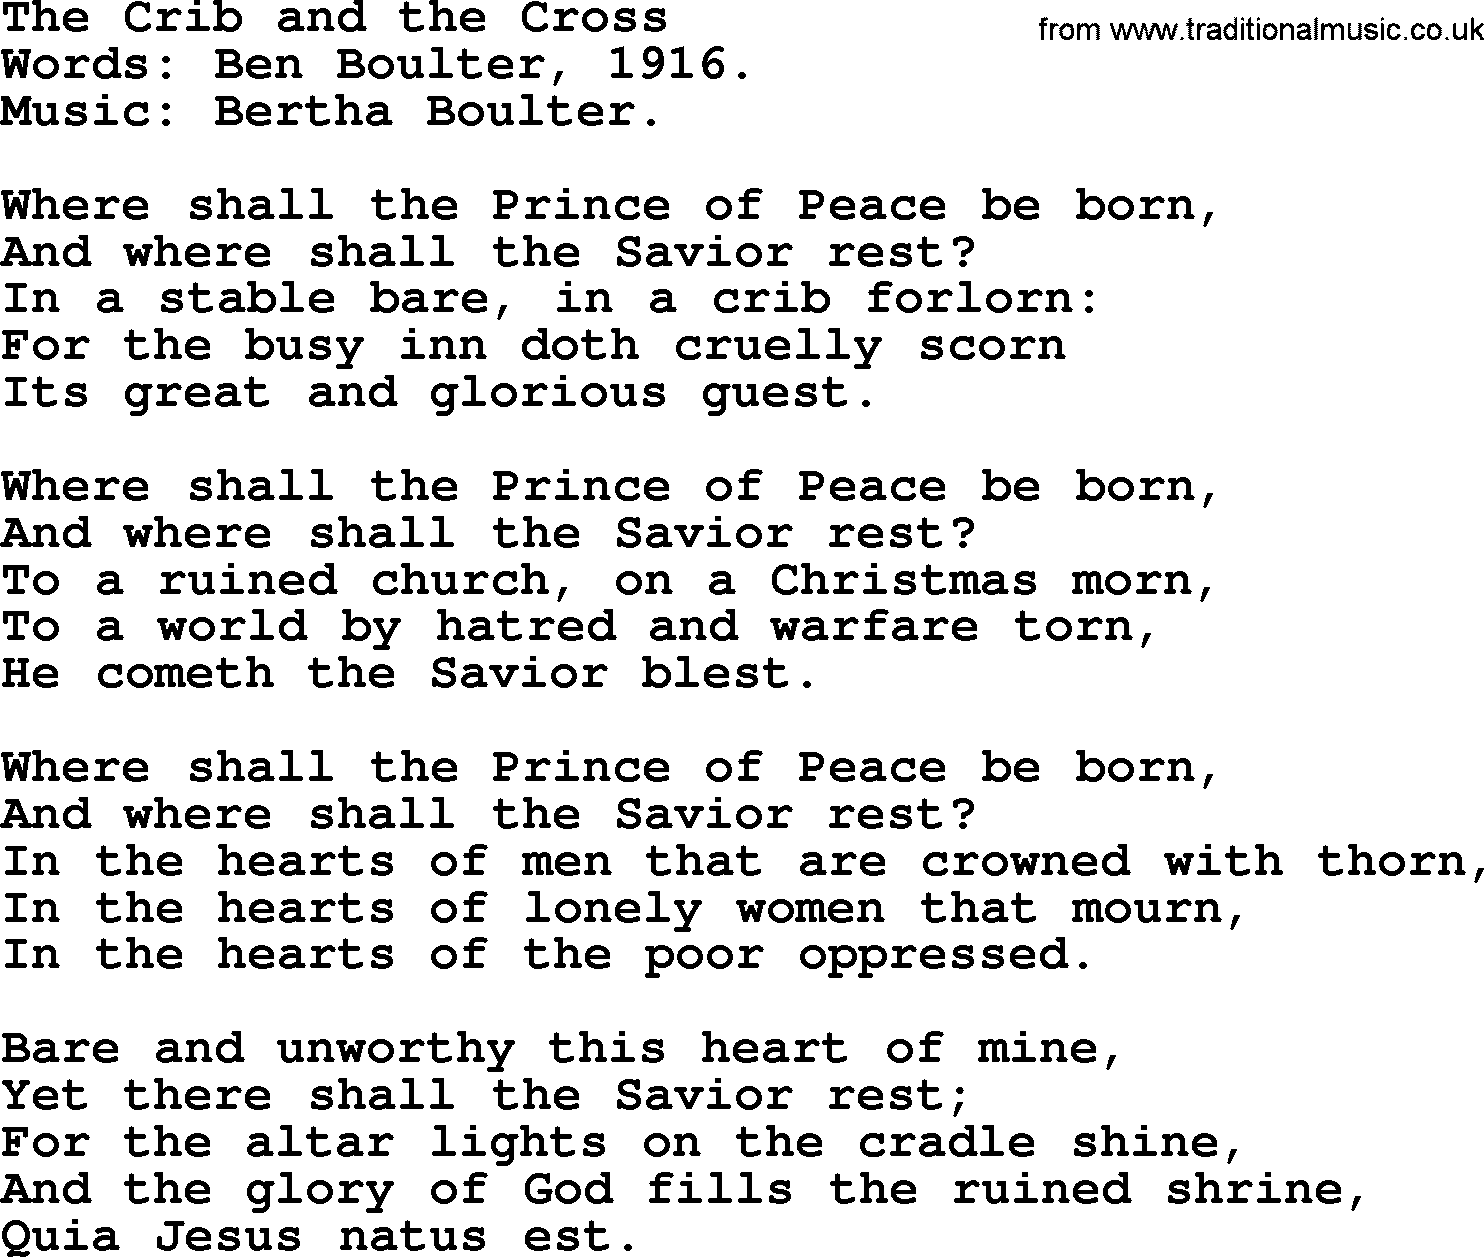 Christmas Hymns, Carols and Songs, title: The Crib And The Cross, lyrics with PDF